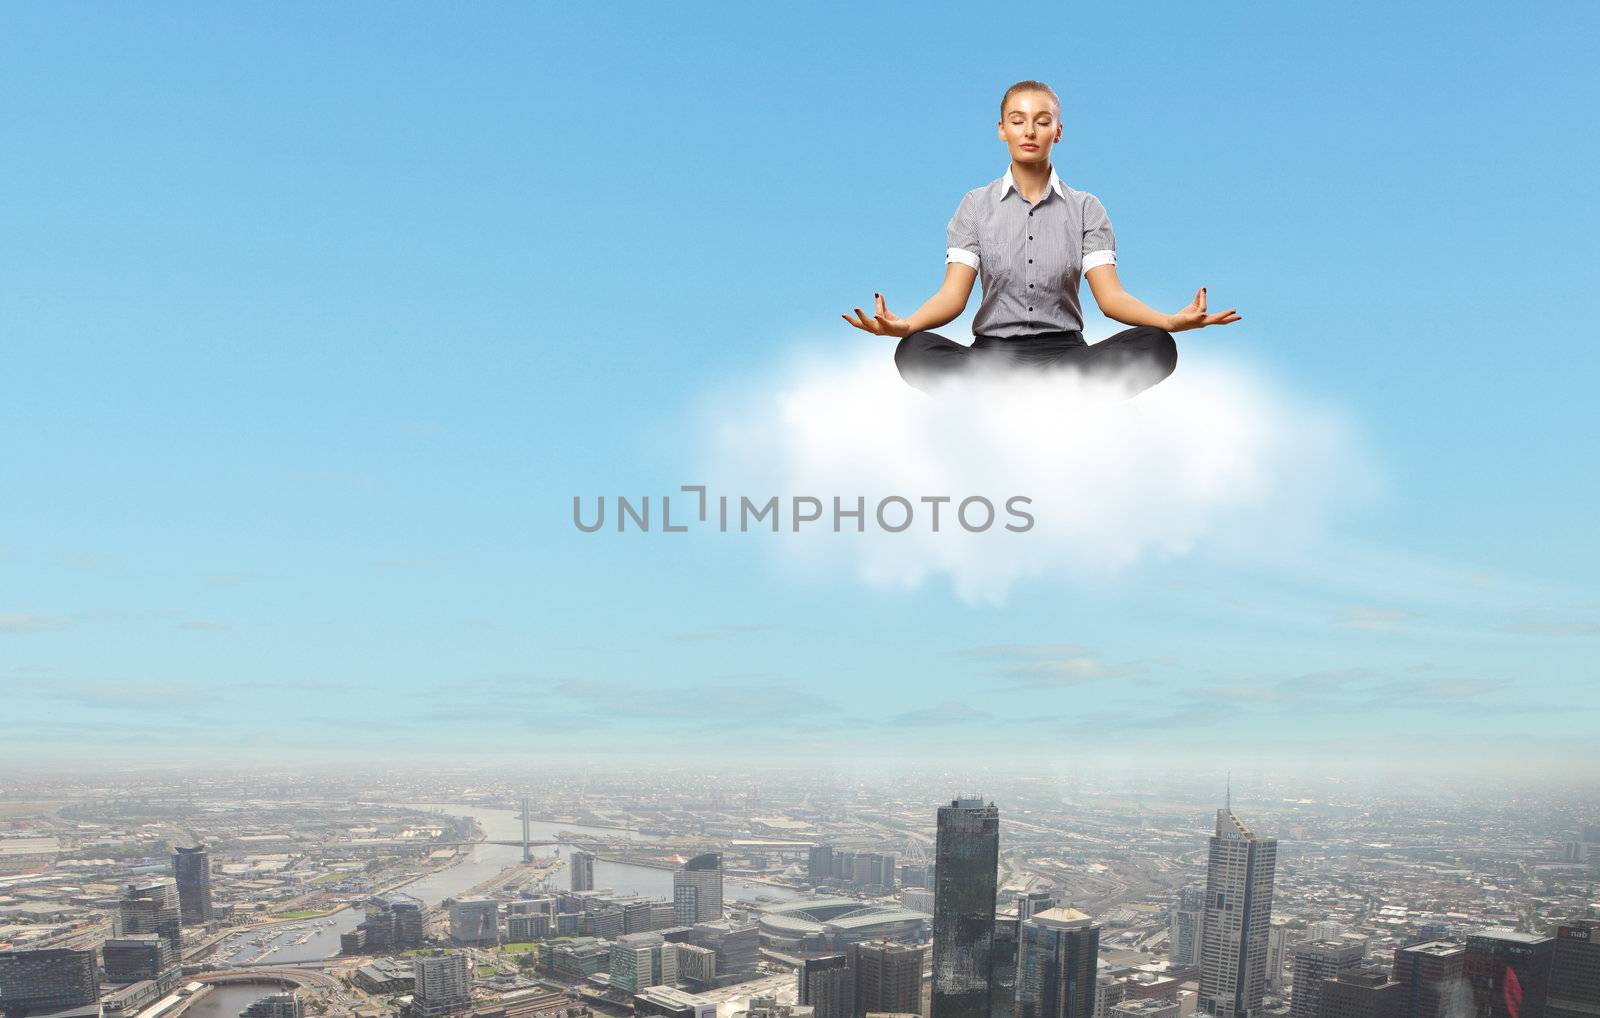 Businesswoman meditating sitting on the cloud by sergey_nivens